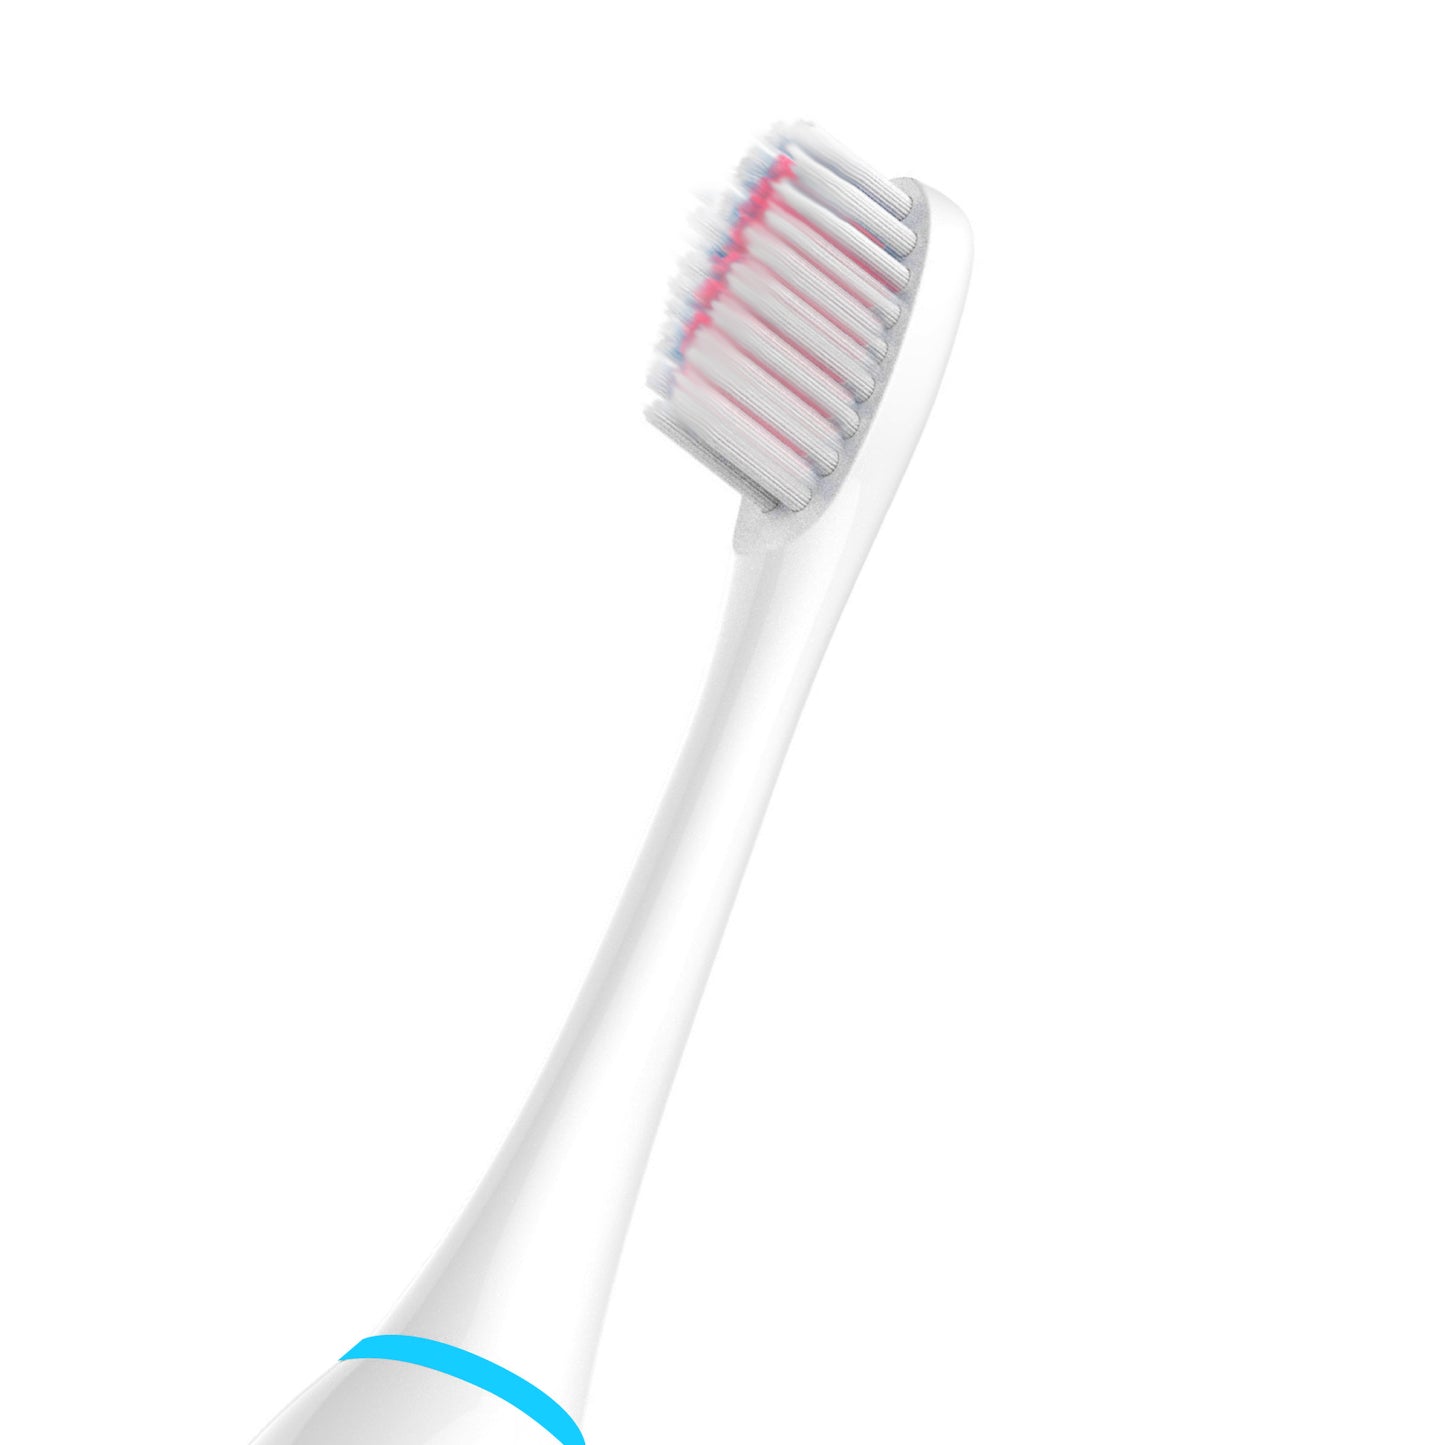 pink toothbrush for electric toothbrush